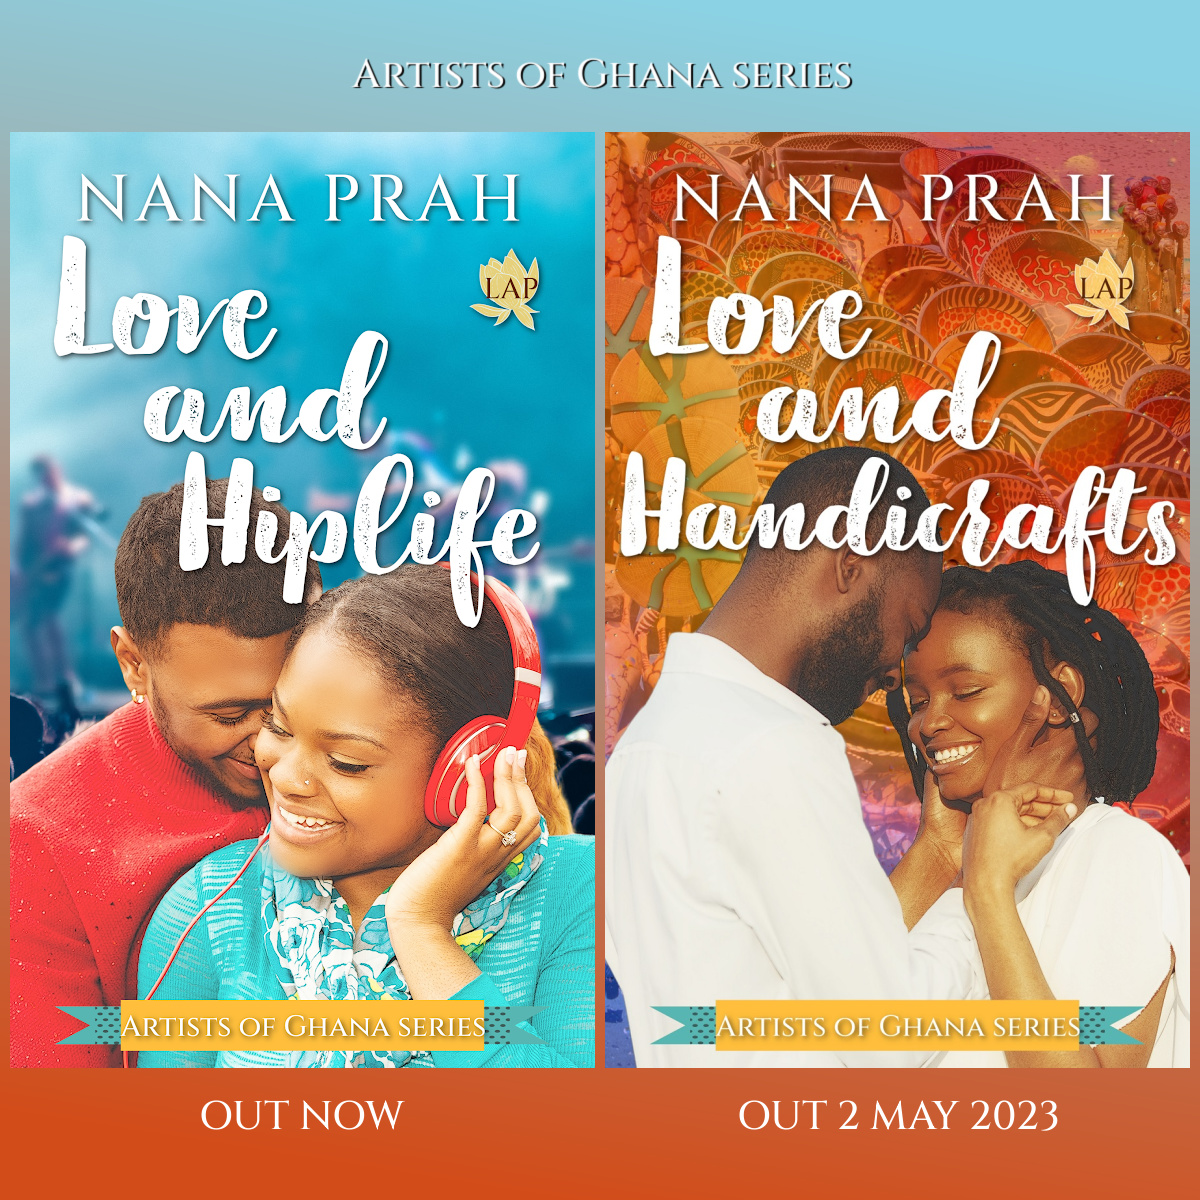 We're excited to be showing off the new look covers for the Artists of Ghana #ContemporaryRomance  series by @NanaPrah published by @LoveAfricaPress 

loveafricabookclub.com/post/the-artis…

#BlackRomance #romancenovels